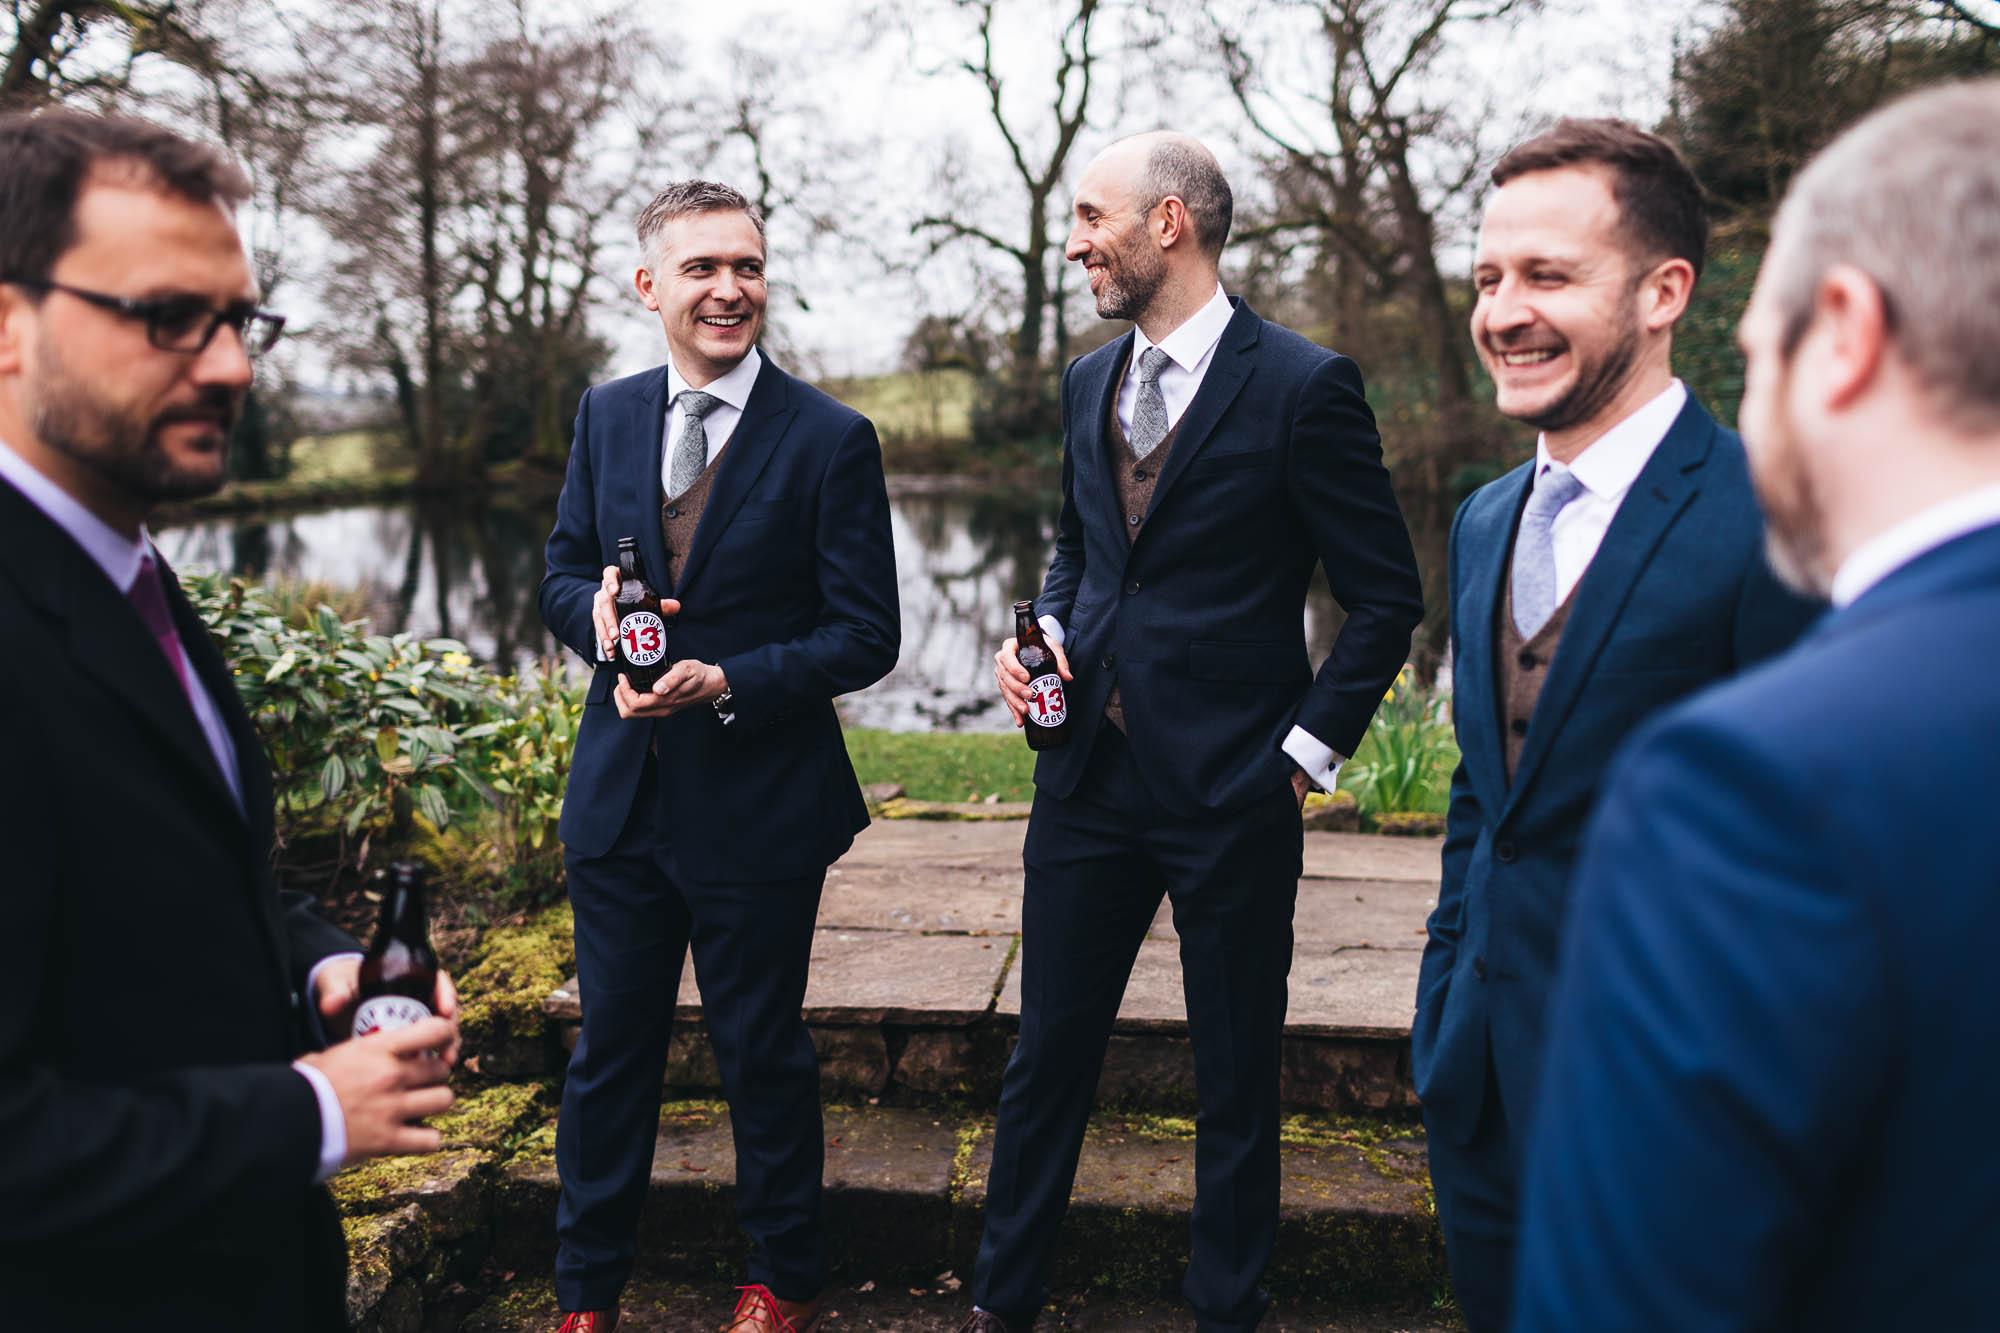 Groomsmen share a beer outside in the morning before wedding ceremony